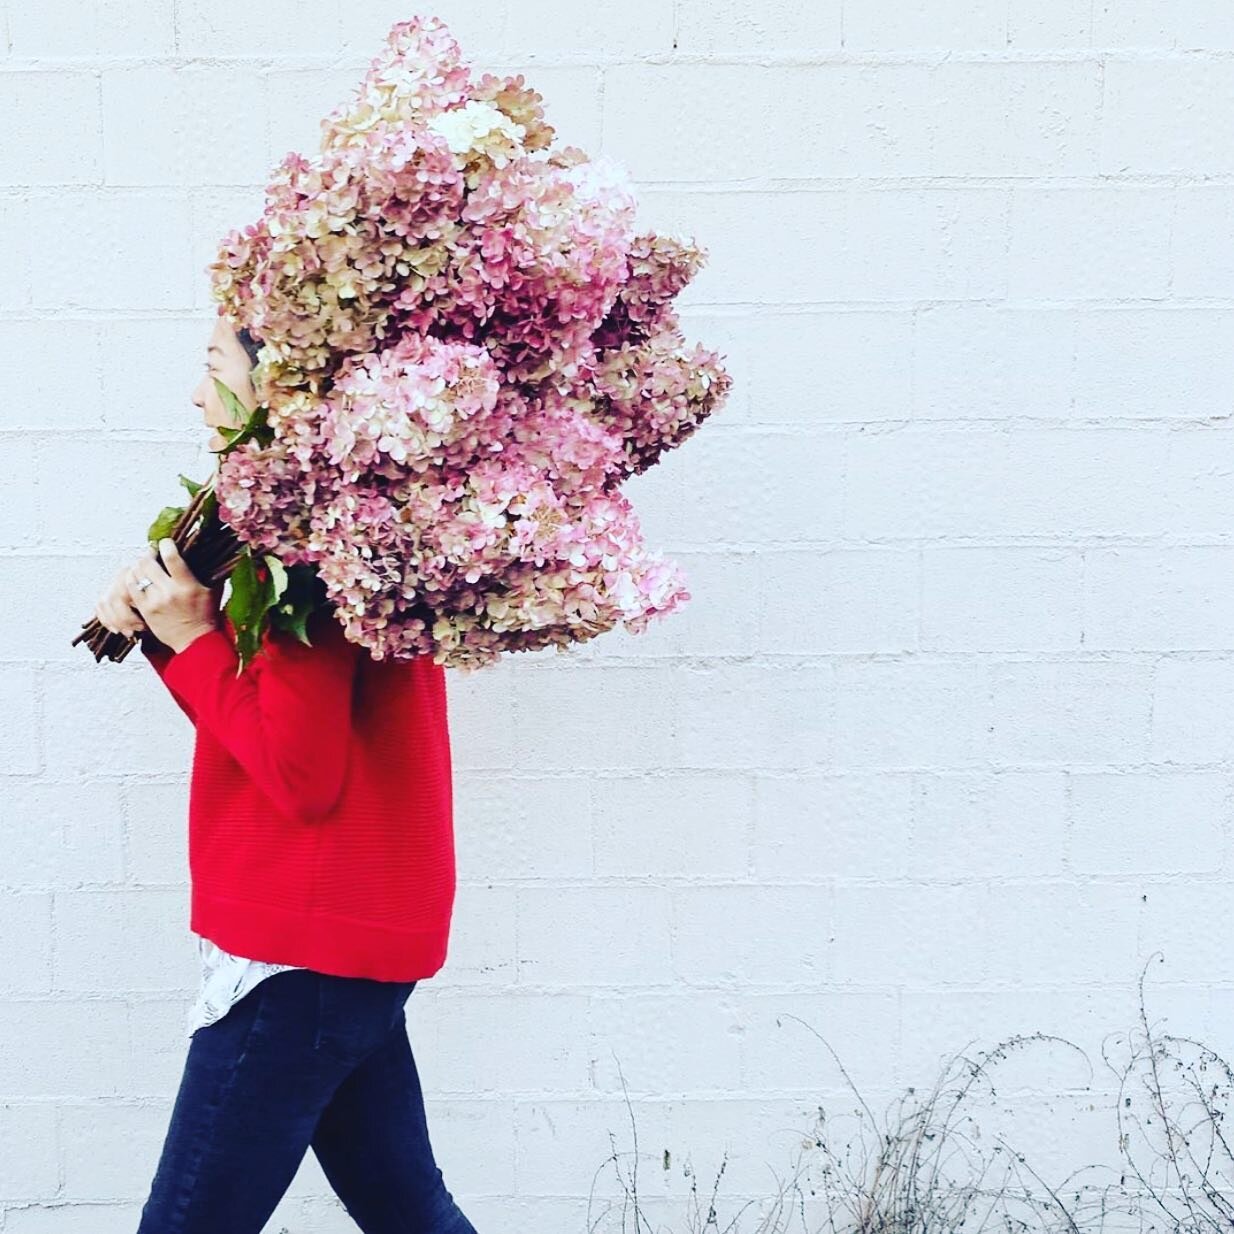 A bunch of homestead hydrangeas, like this one from @theivyleague_au, will absolutely do me for Mother&rsquo;s Day @bennyontheroad. Easy. K thanks byeeeee.